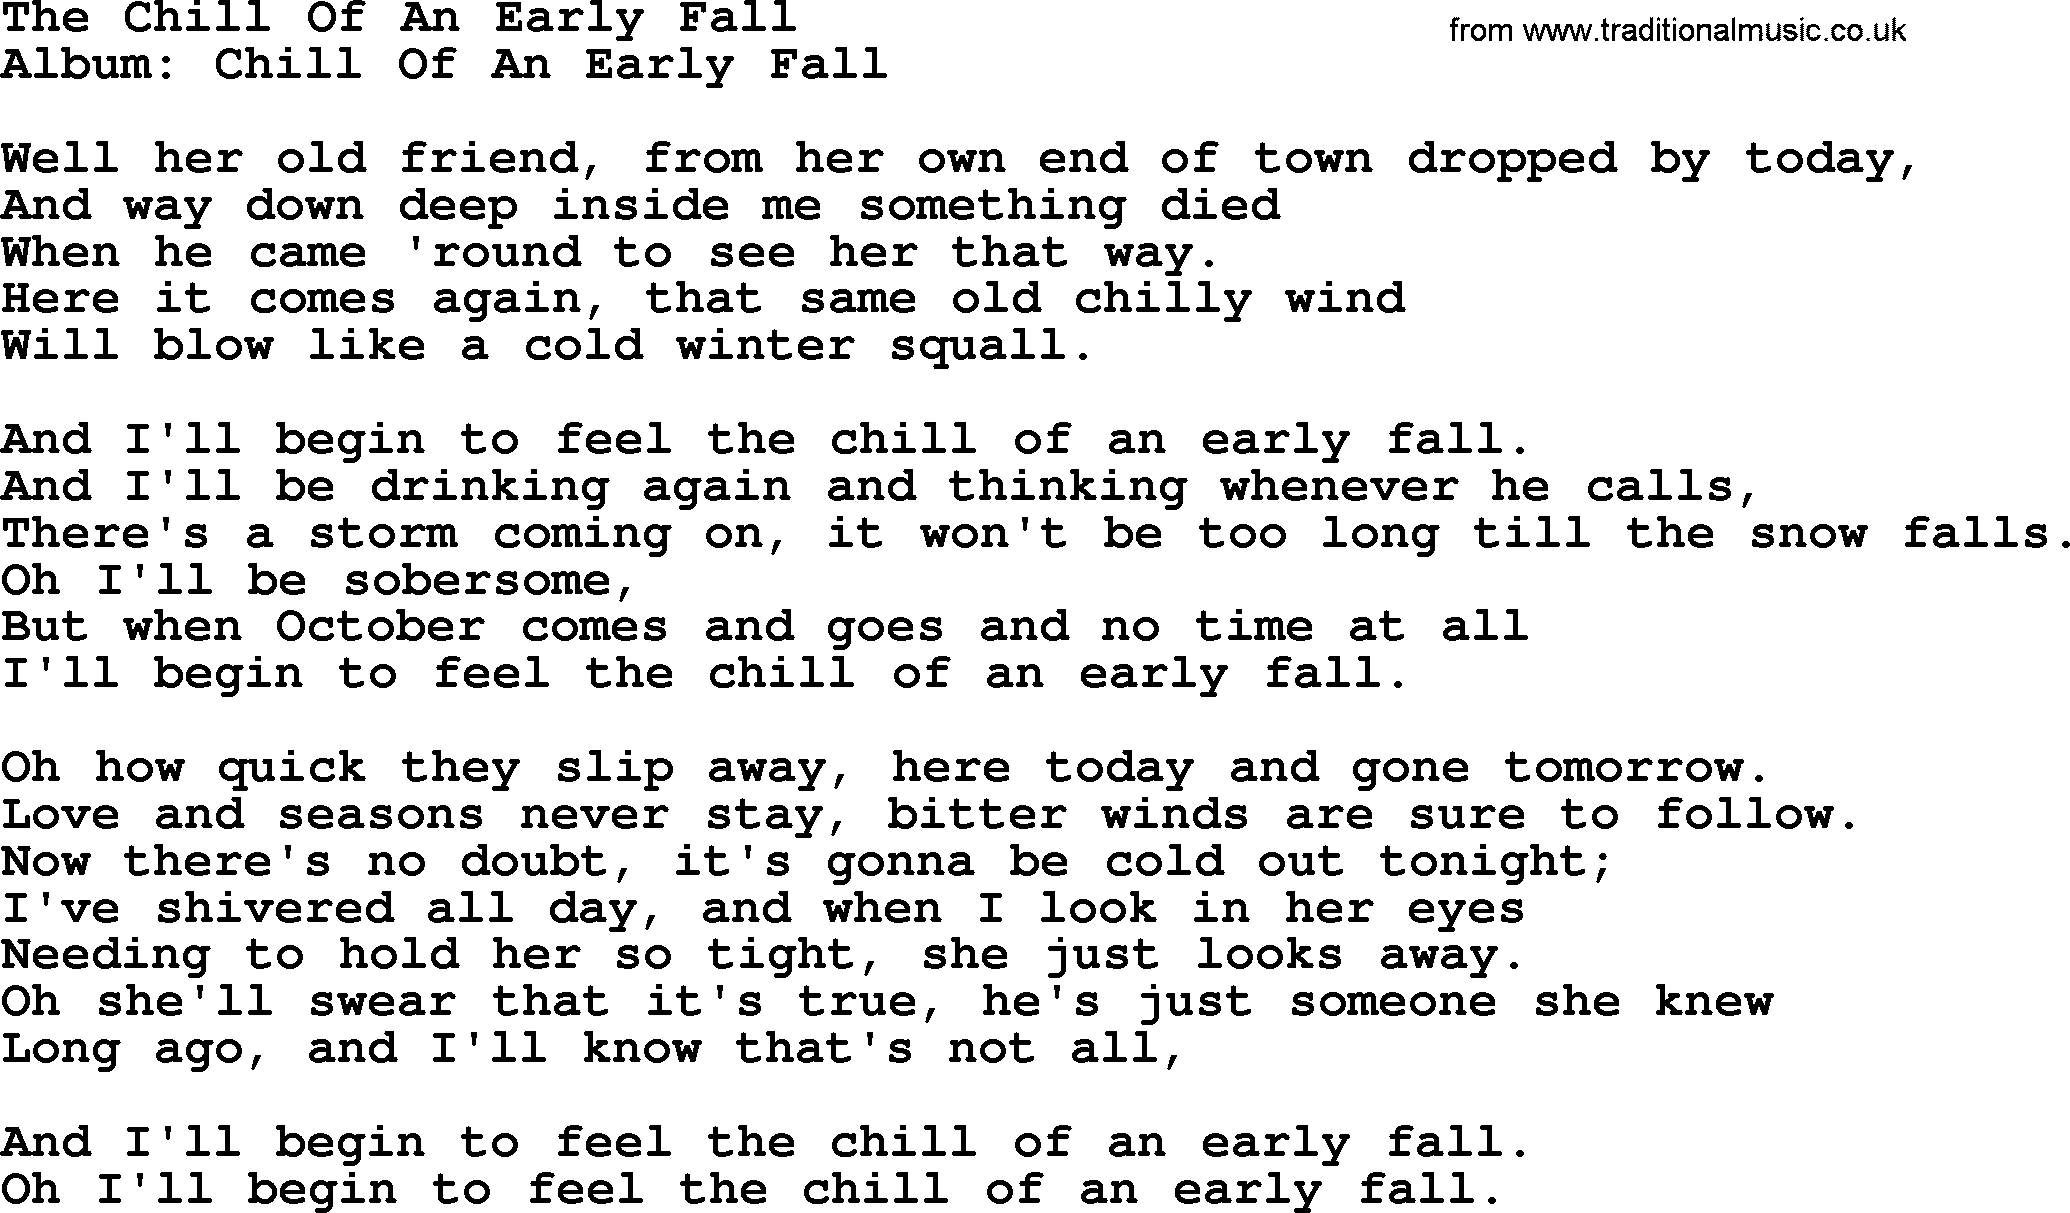 George Strait song: The Chill Of An Early Fall, lyrics